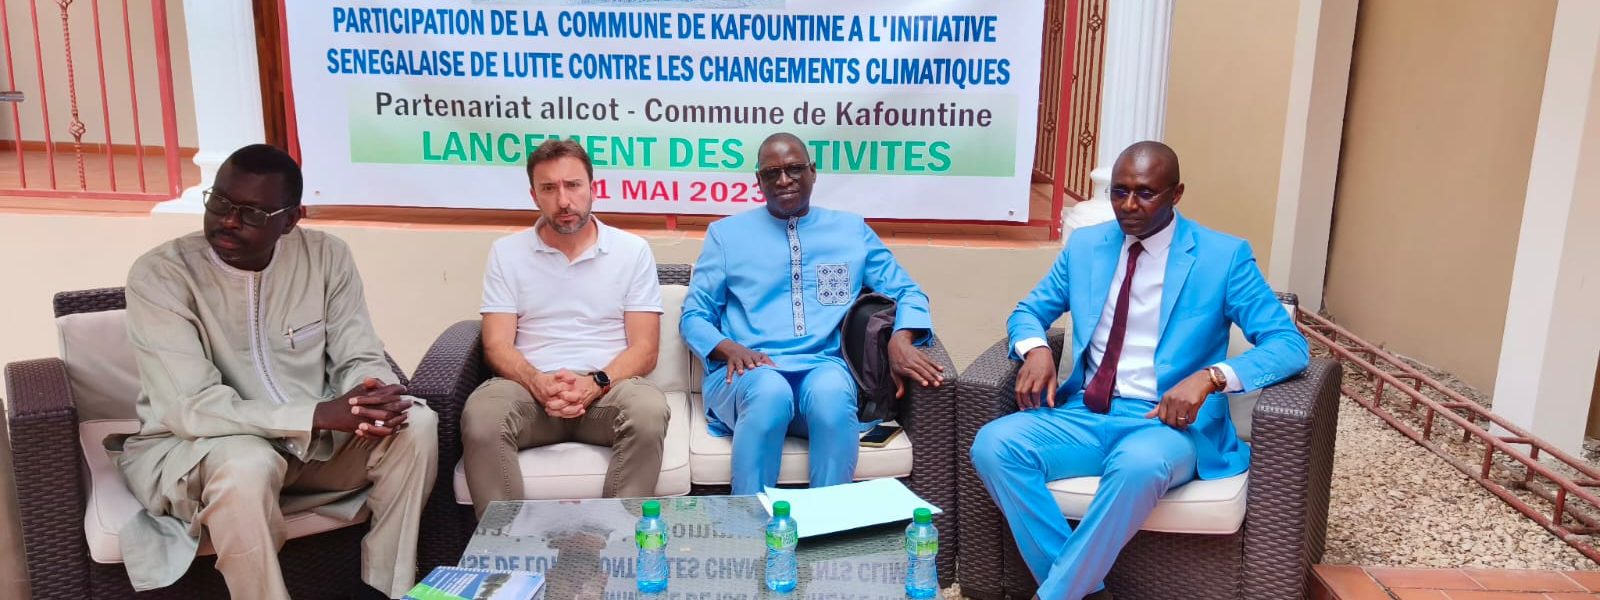 The municipality of Kafountine and ALLCOT signing up a protocol